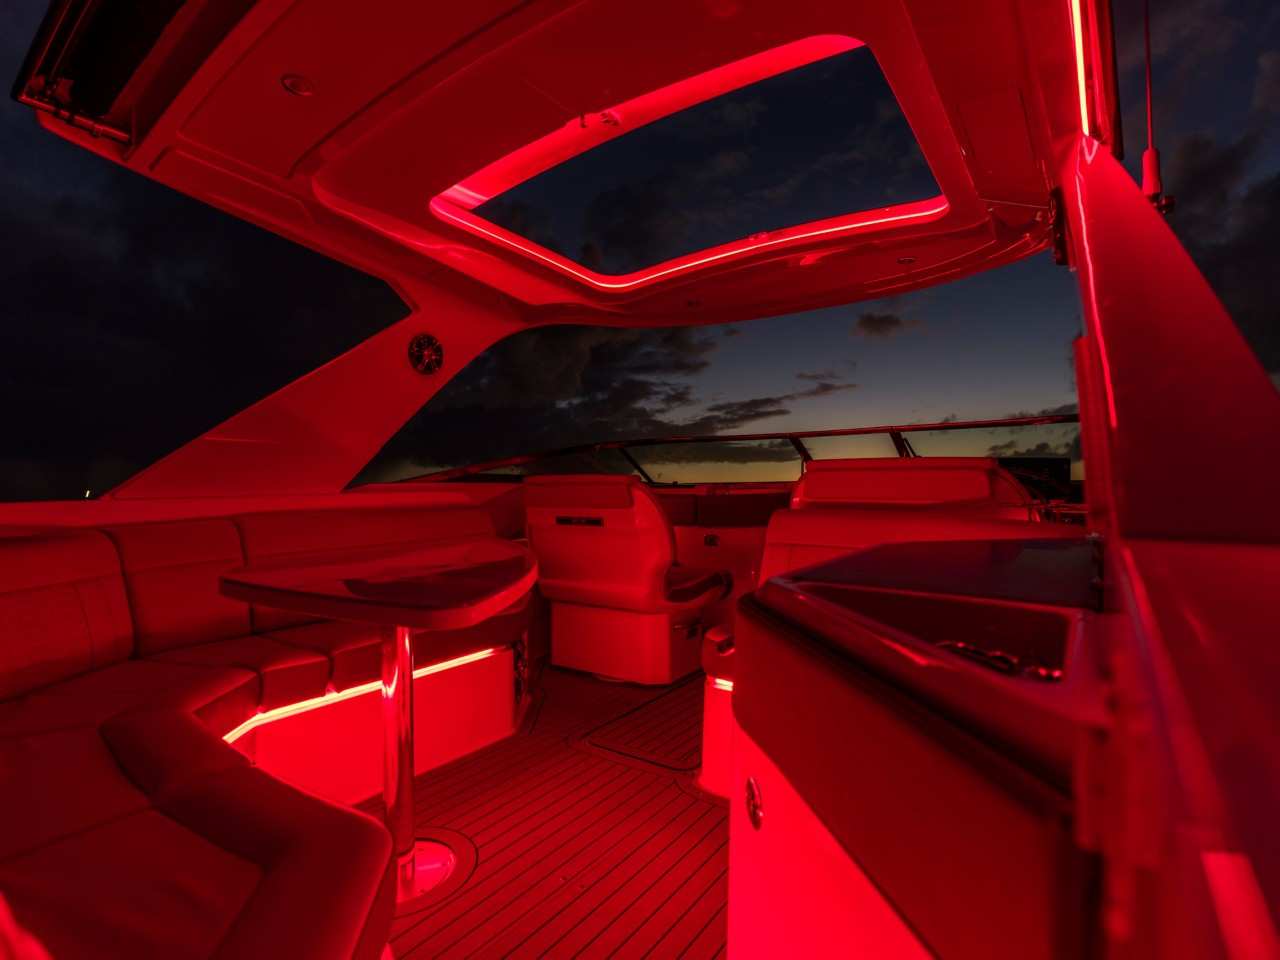 SLX-310-Outboard-cockpit-night-red-accent-lighting